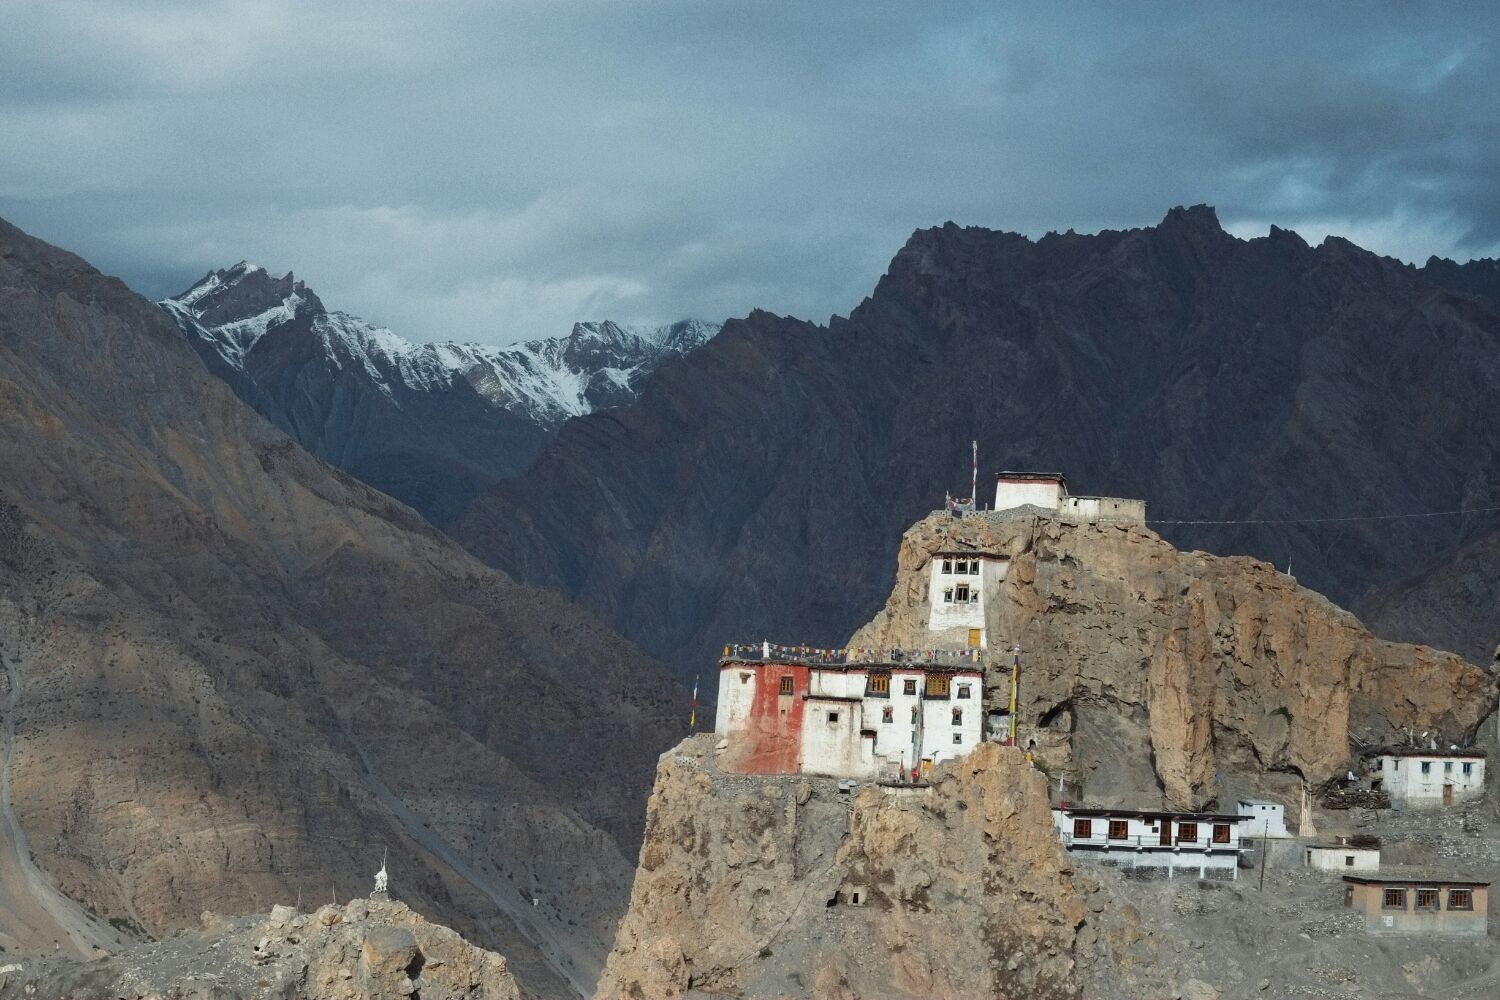 Dhankar Gompa, perched on a spur high above the valley floor.